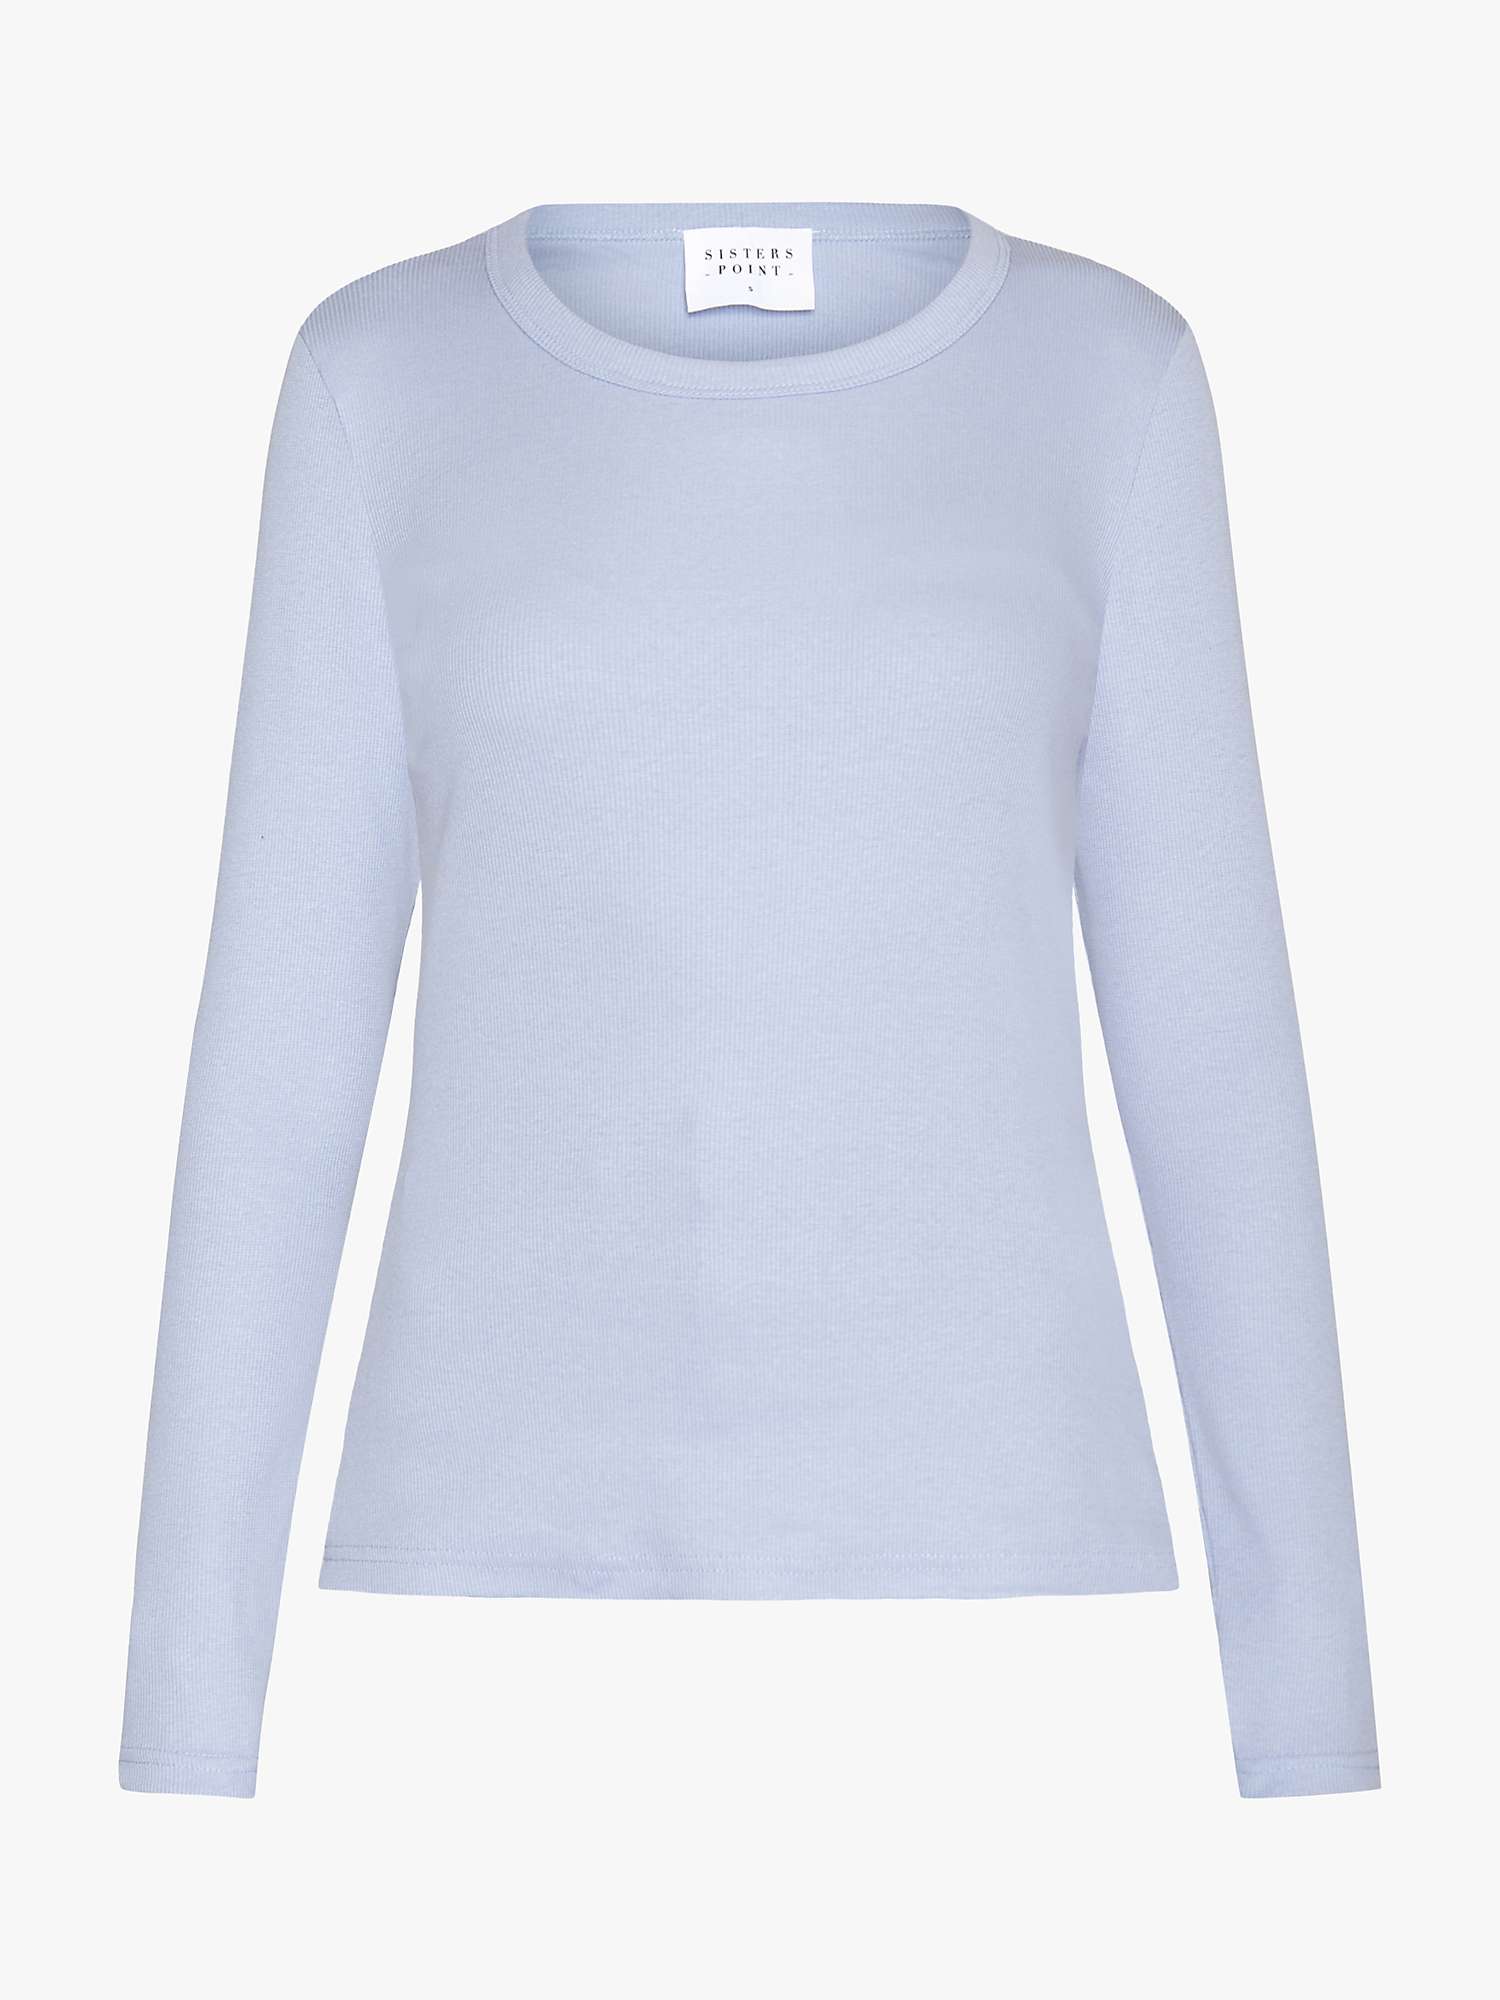 Buy Sisters Point Slim Fitted Rib Long Sleeve T-Shirt Online at johnlewis.com